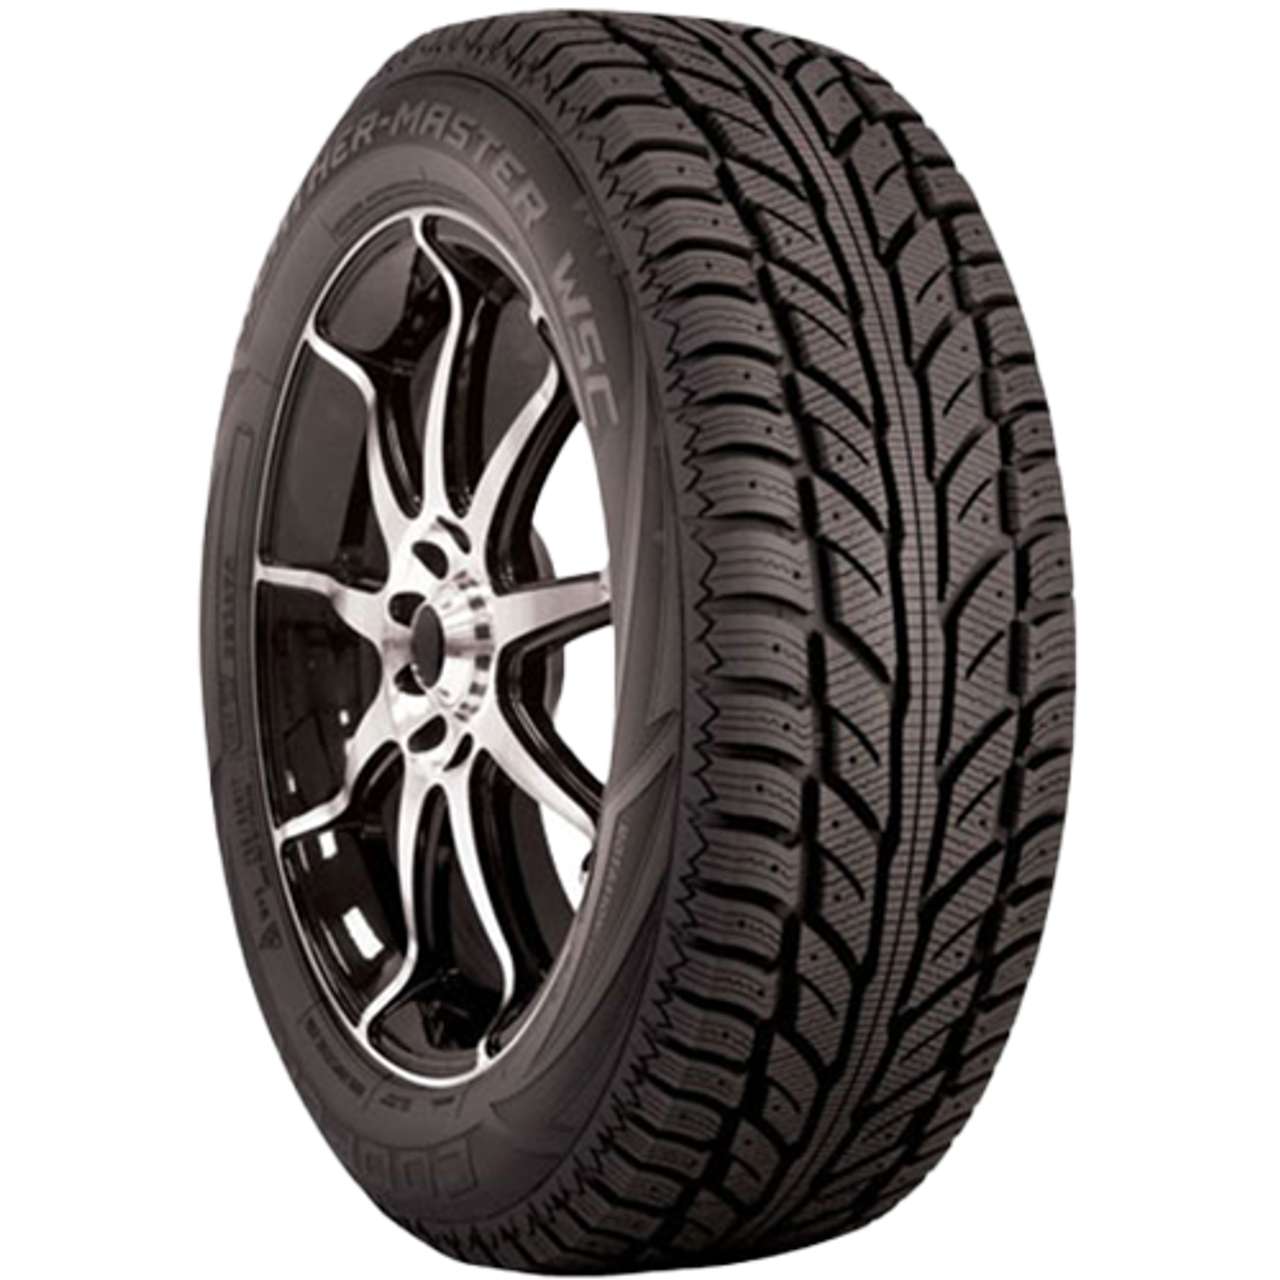 COOPER WEATHERMASTER WSC 205/55R16 91T STUDDABLE BSW